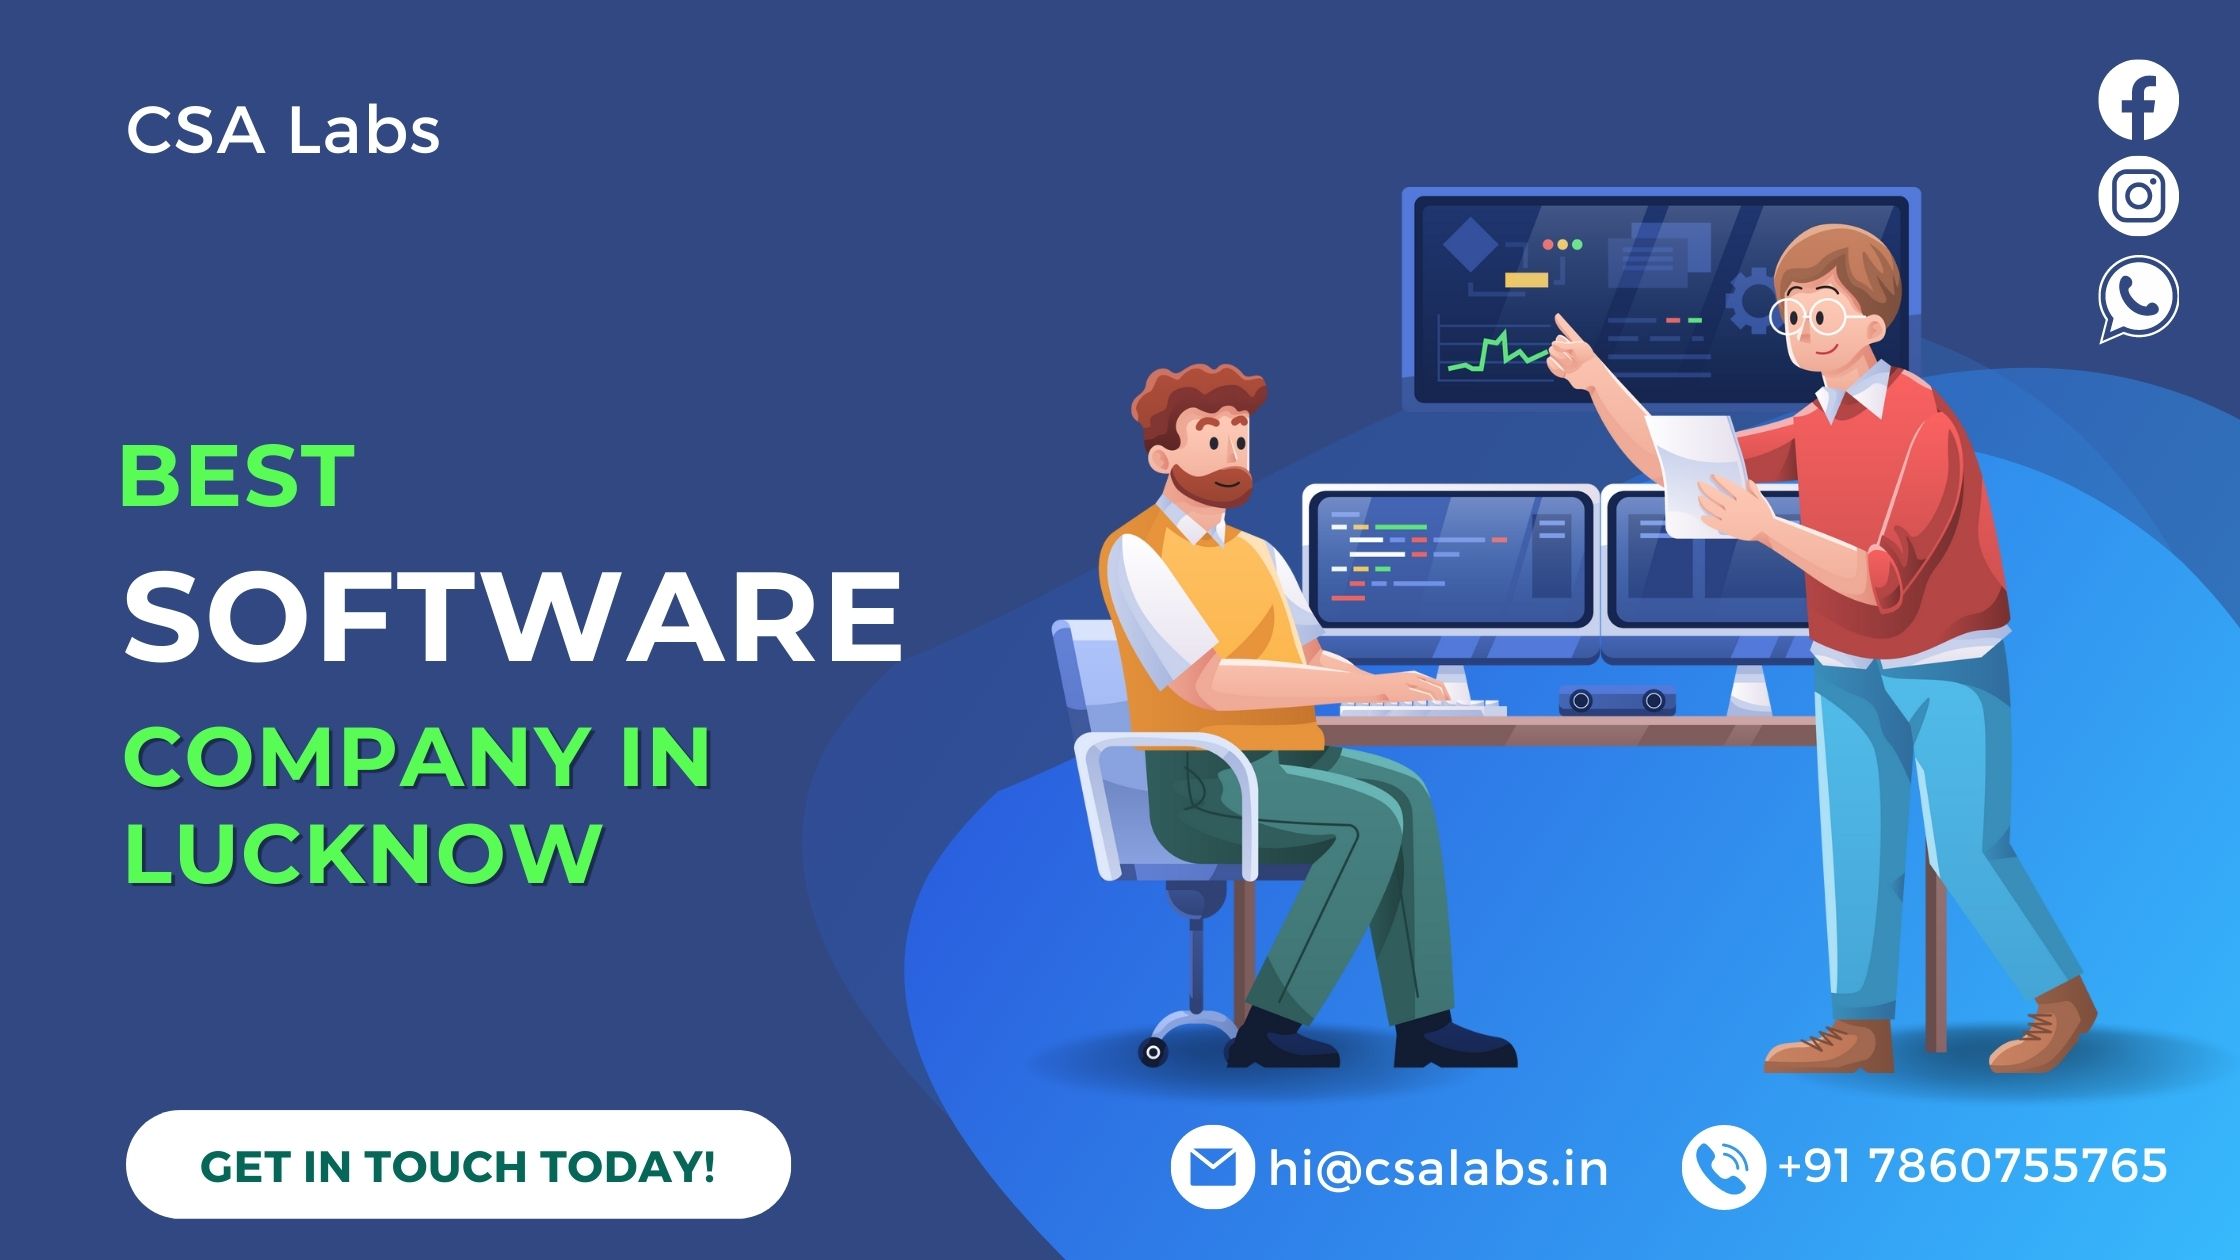 Best Software Company In Lucknow